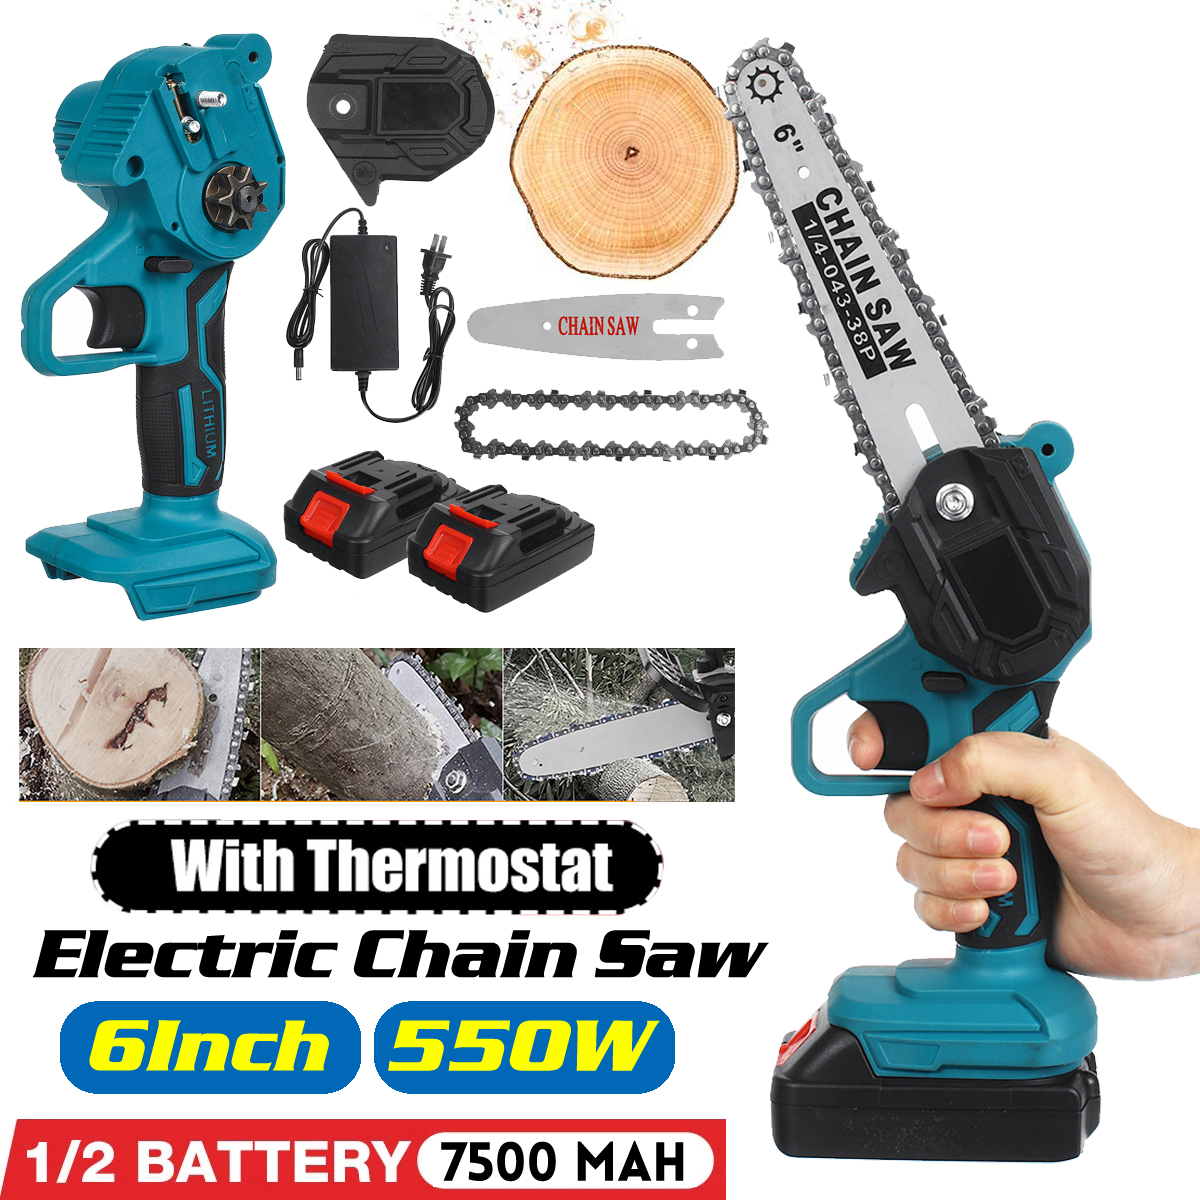 6-Inch-Electric-Chain-Saw-Portable-Chainsaws-Cutter-Woodworking-Tool-W-1pc-or-2pcs-Battery-1824775-1